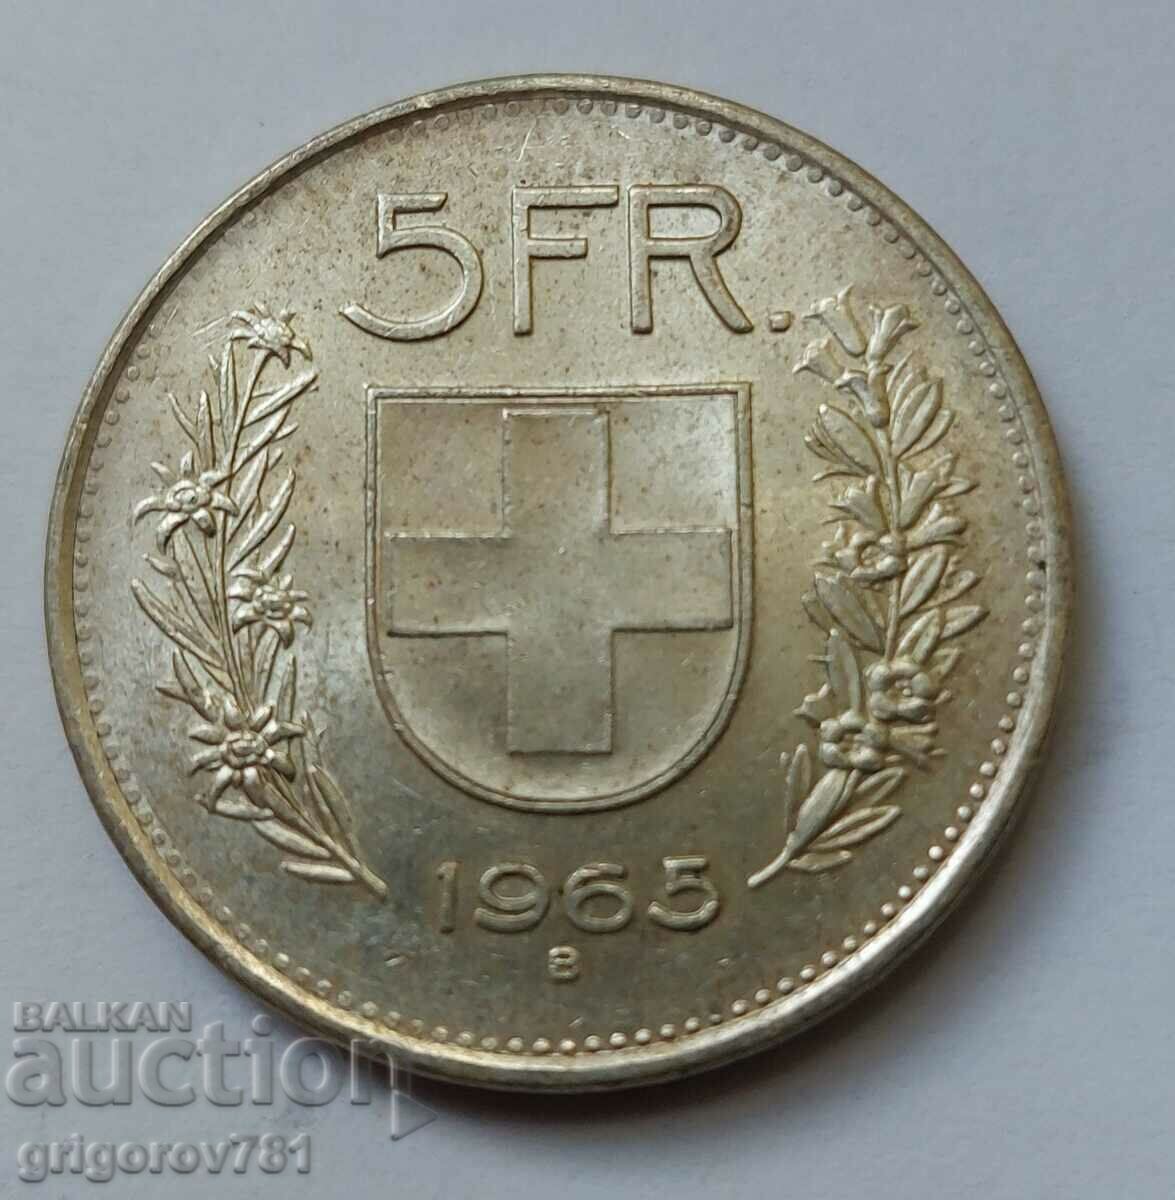 5 Francs Silver Switzerland 1965 B - Silver Coin #7